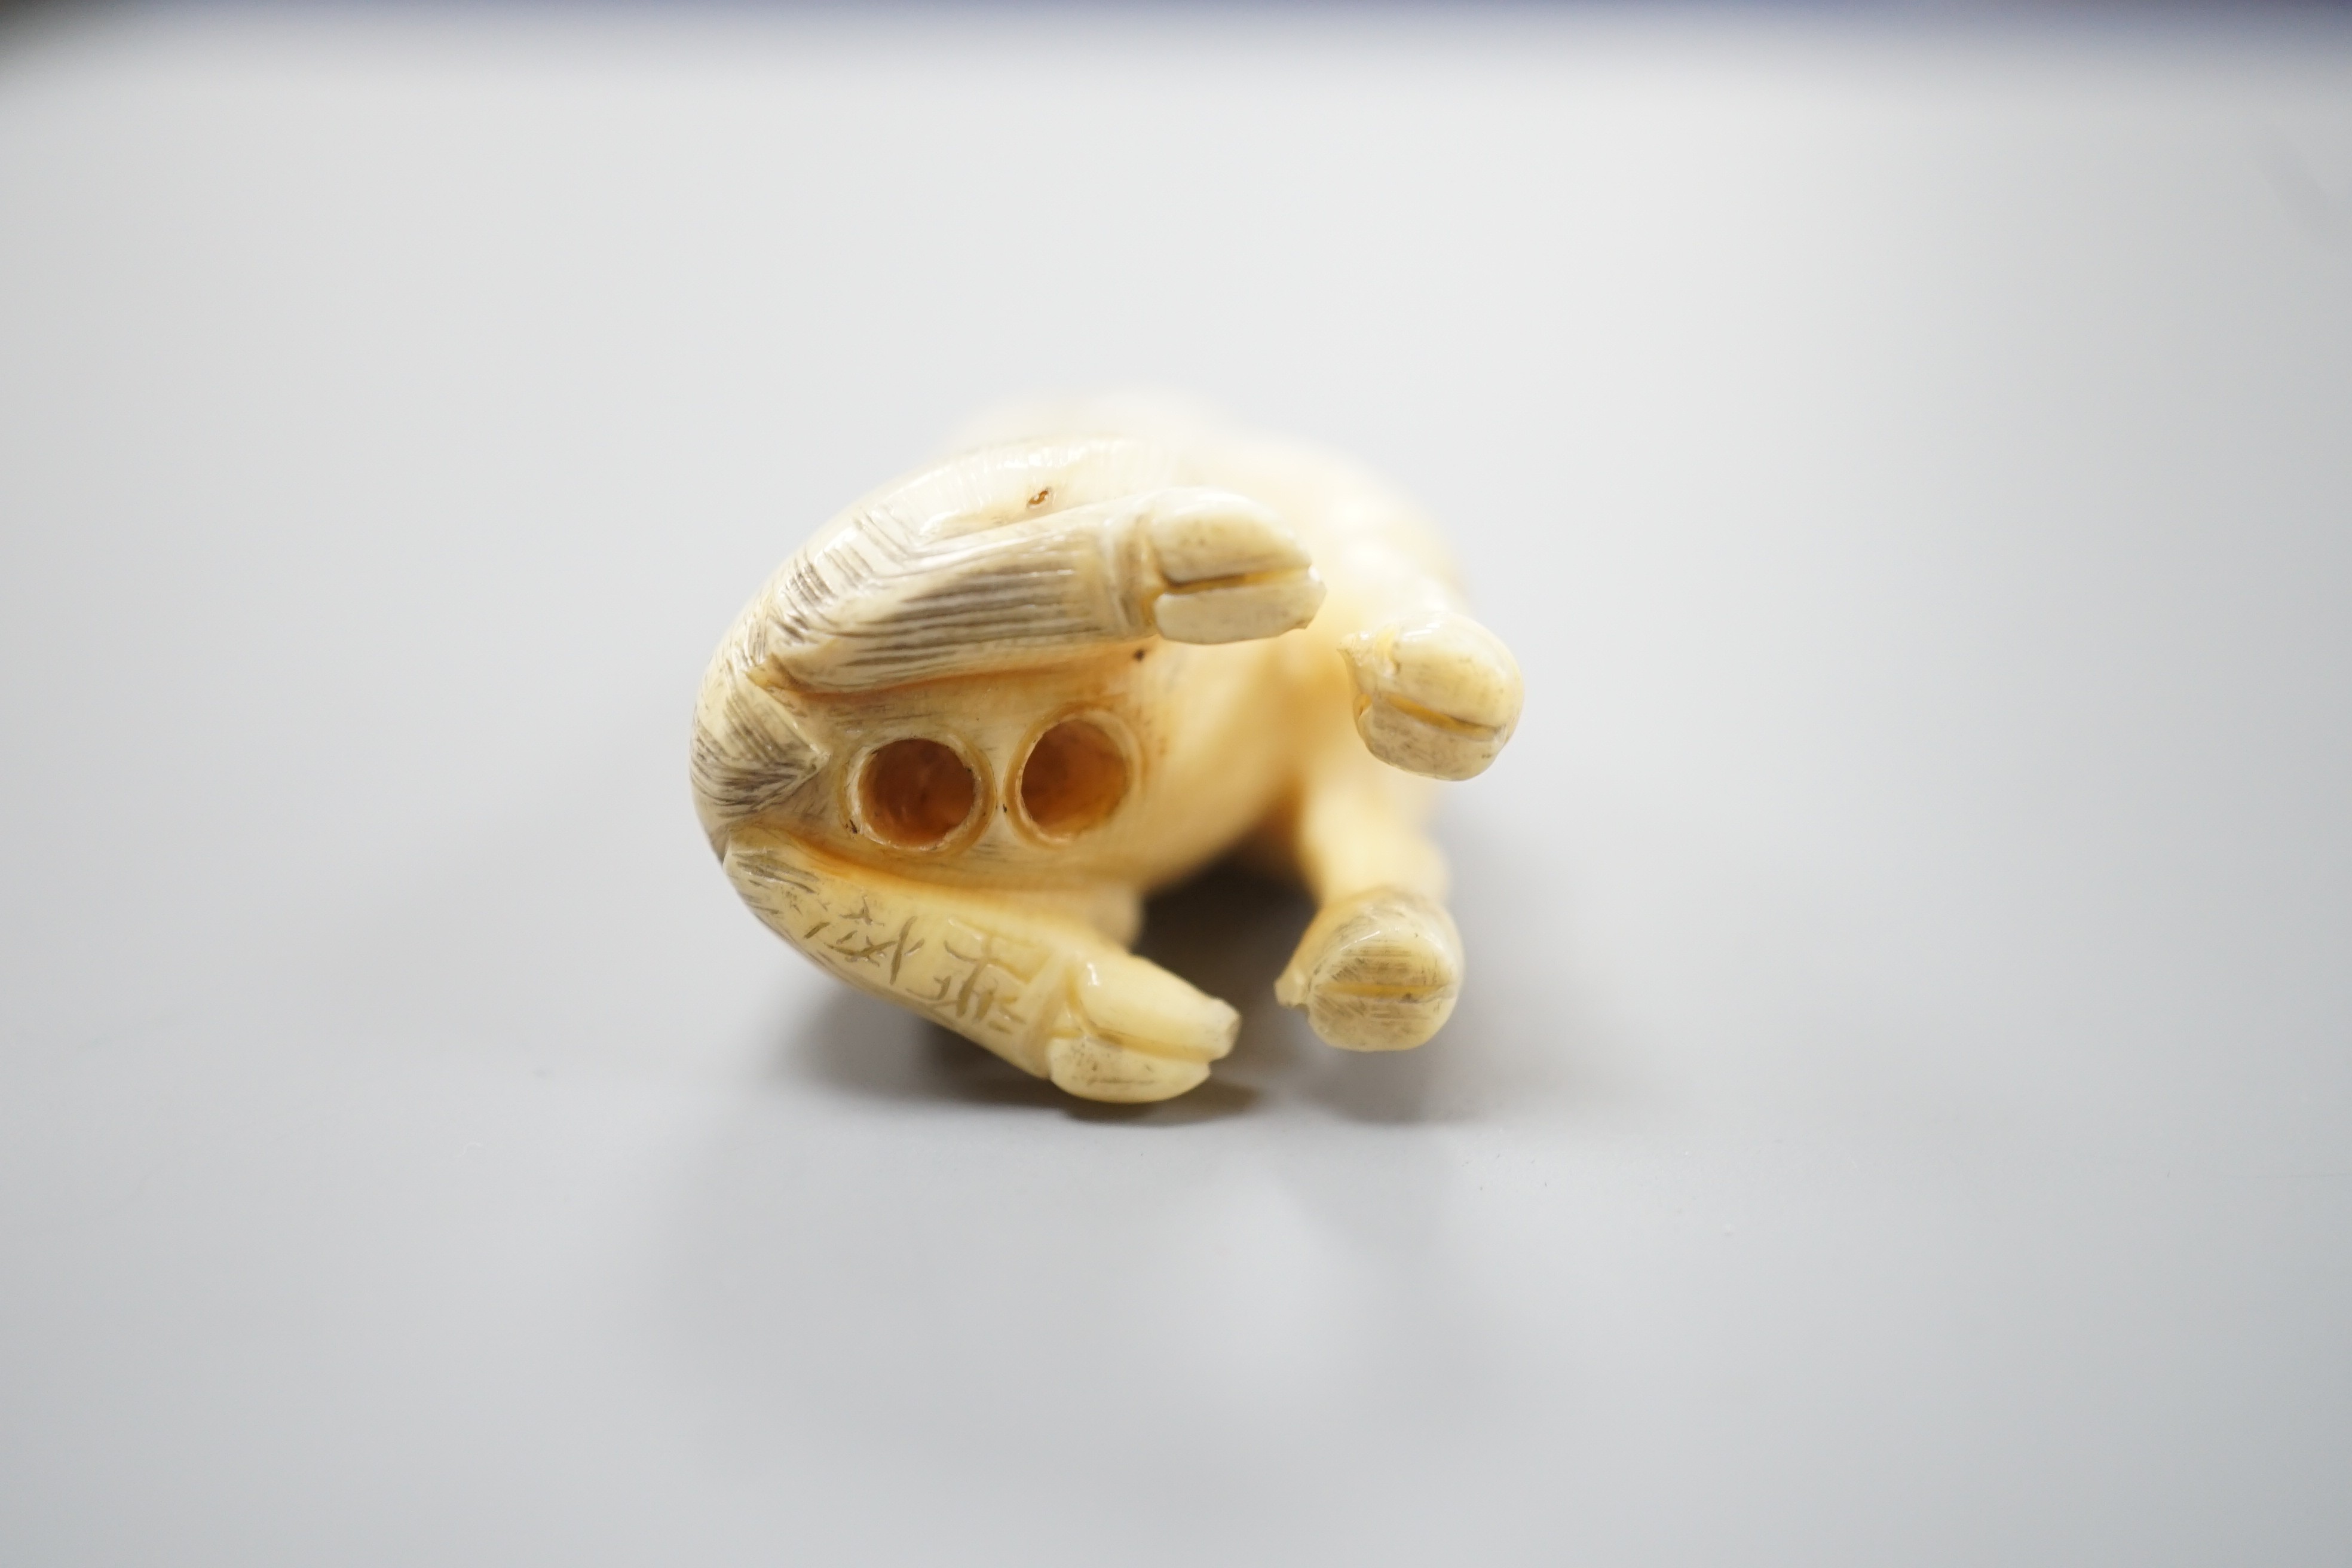 A Japanese ivory netsuke of a seated bellowing deer, 19th century, bears signature, 5.8cm